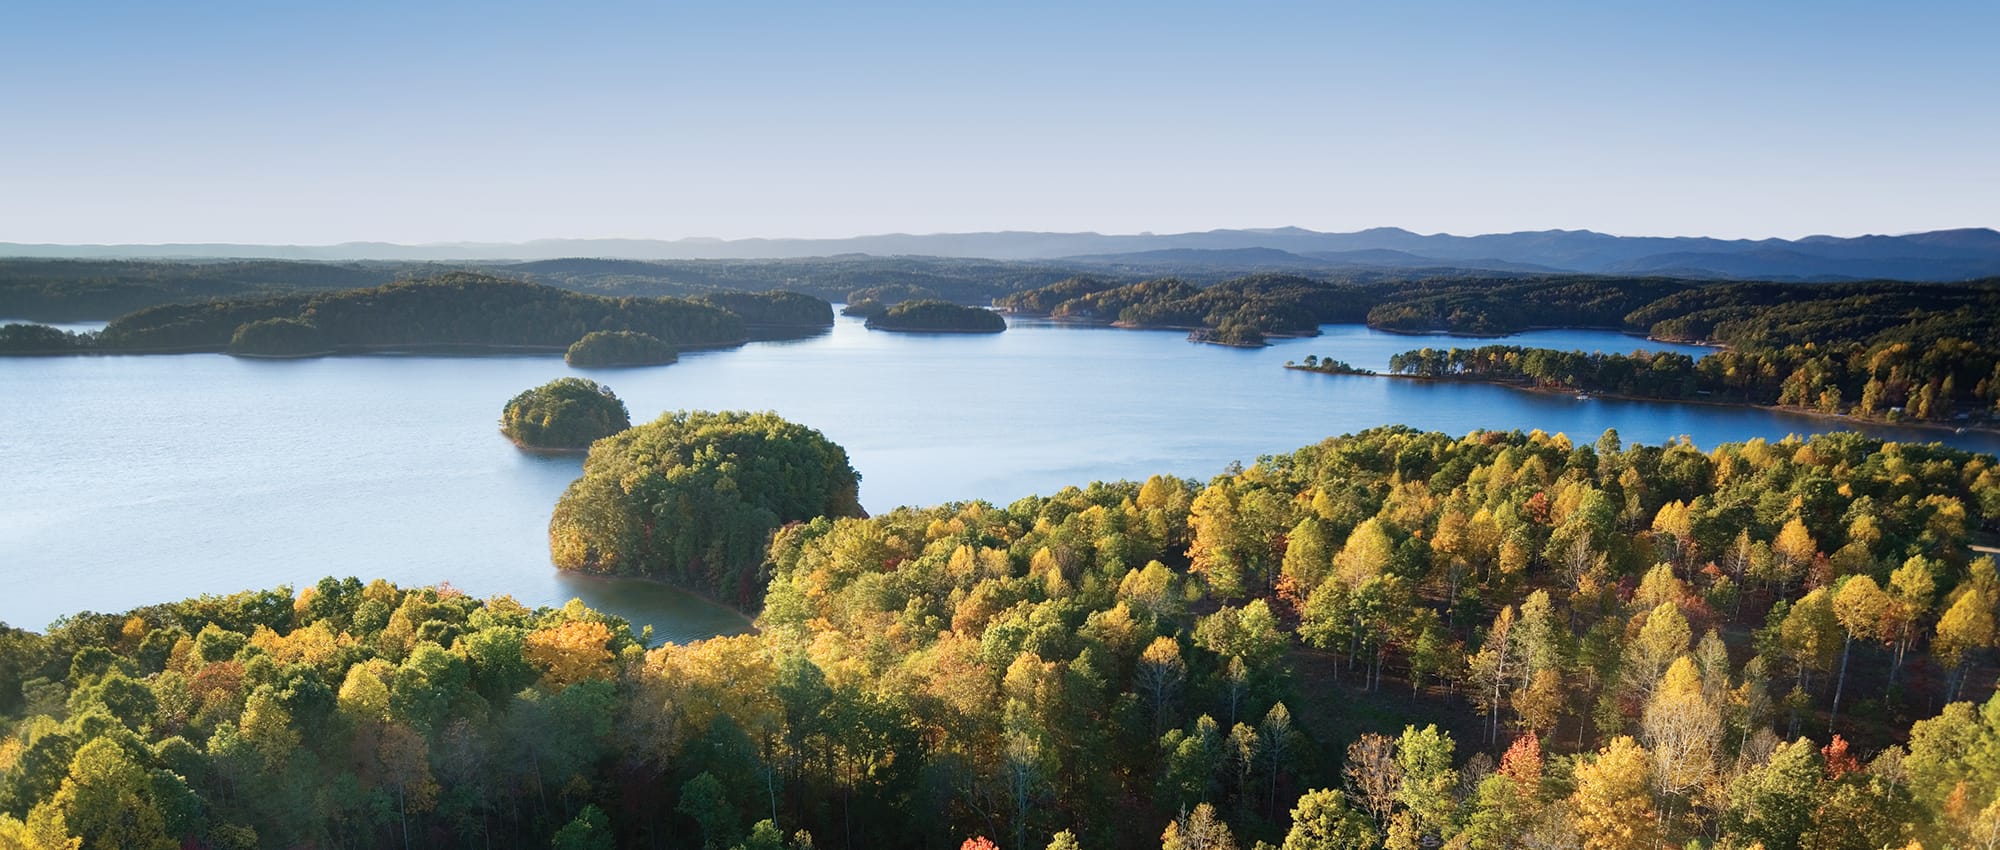 The Landing at Keowee Springs Receives a Summer Surprise